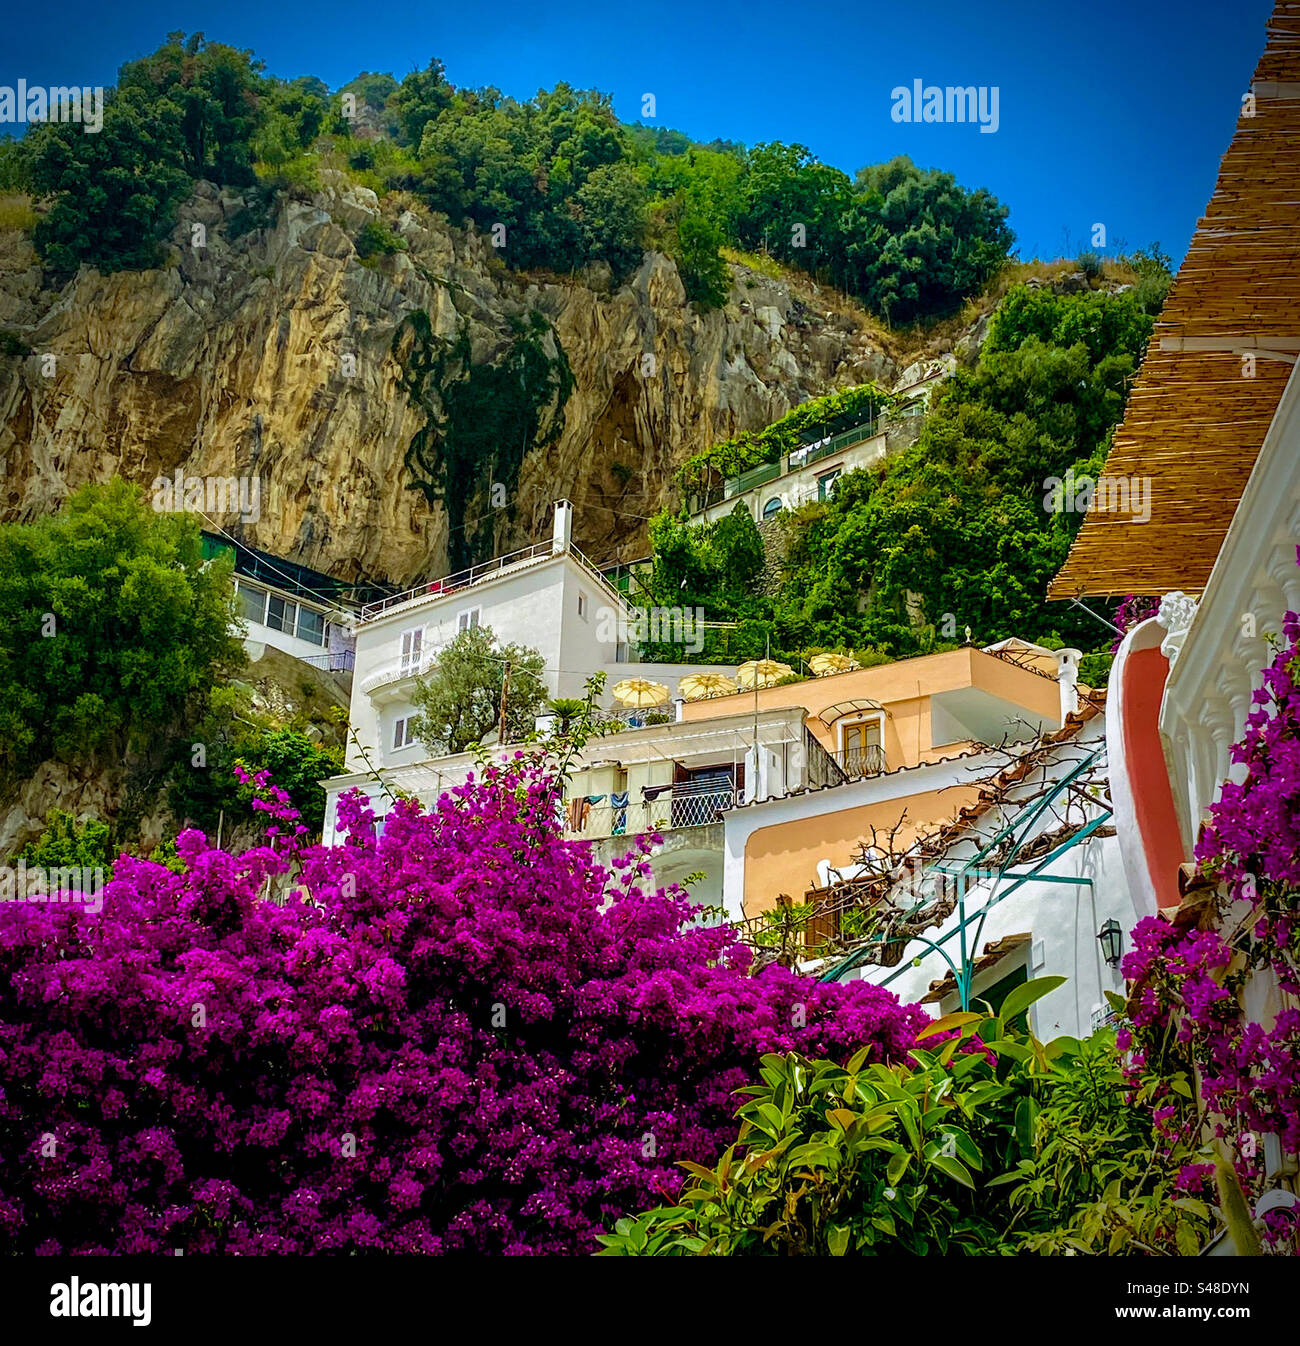 Colorful homes and landscape nestled in the cliffs of Positano on the Amalfi coast of Italy Stock Photo